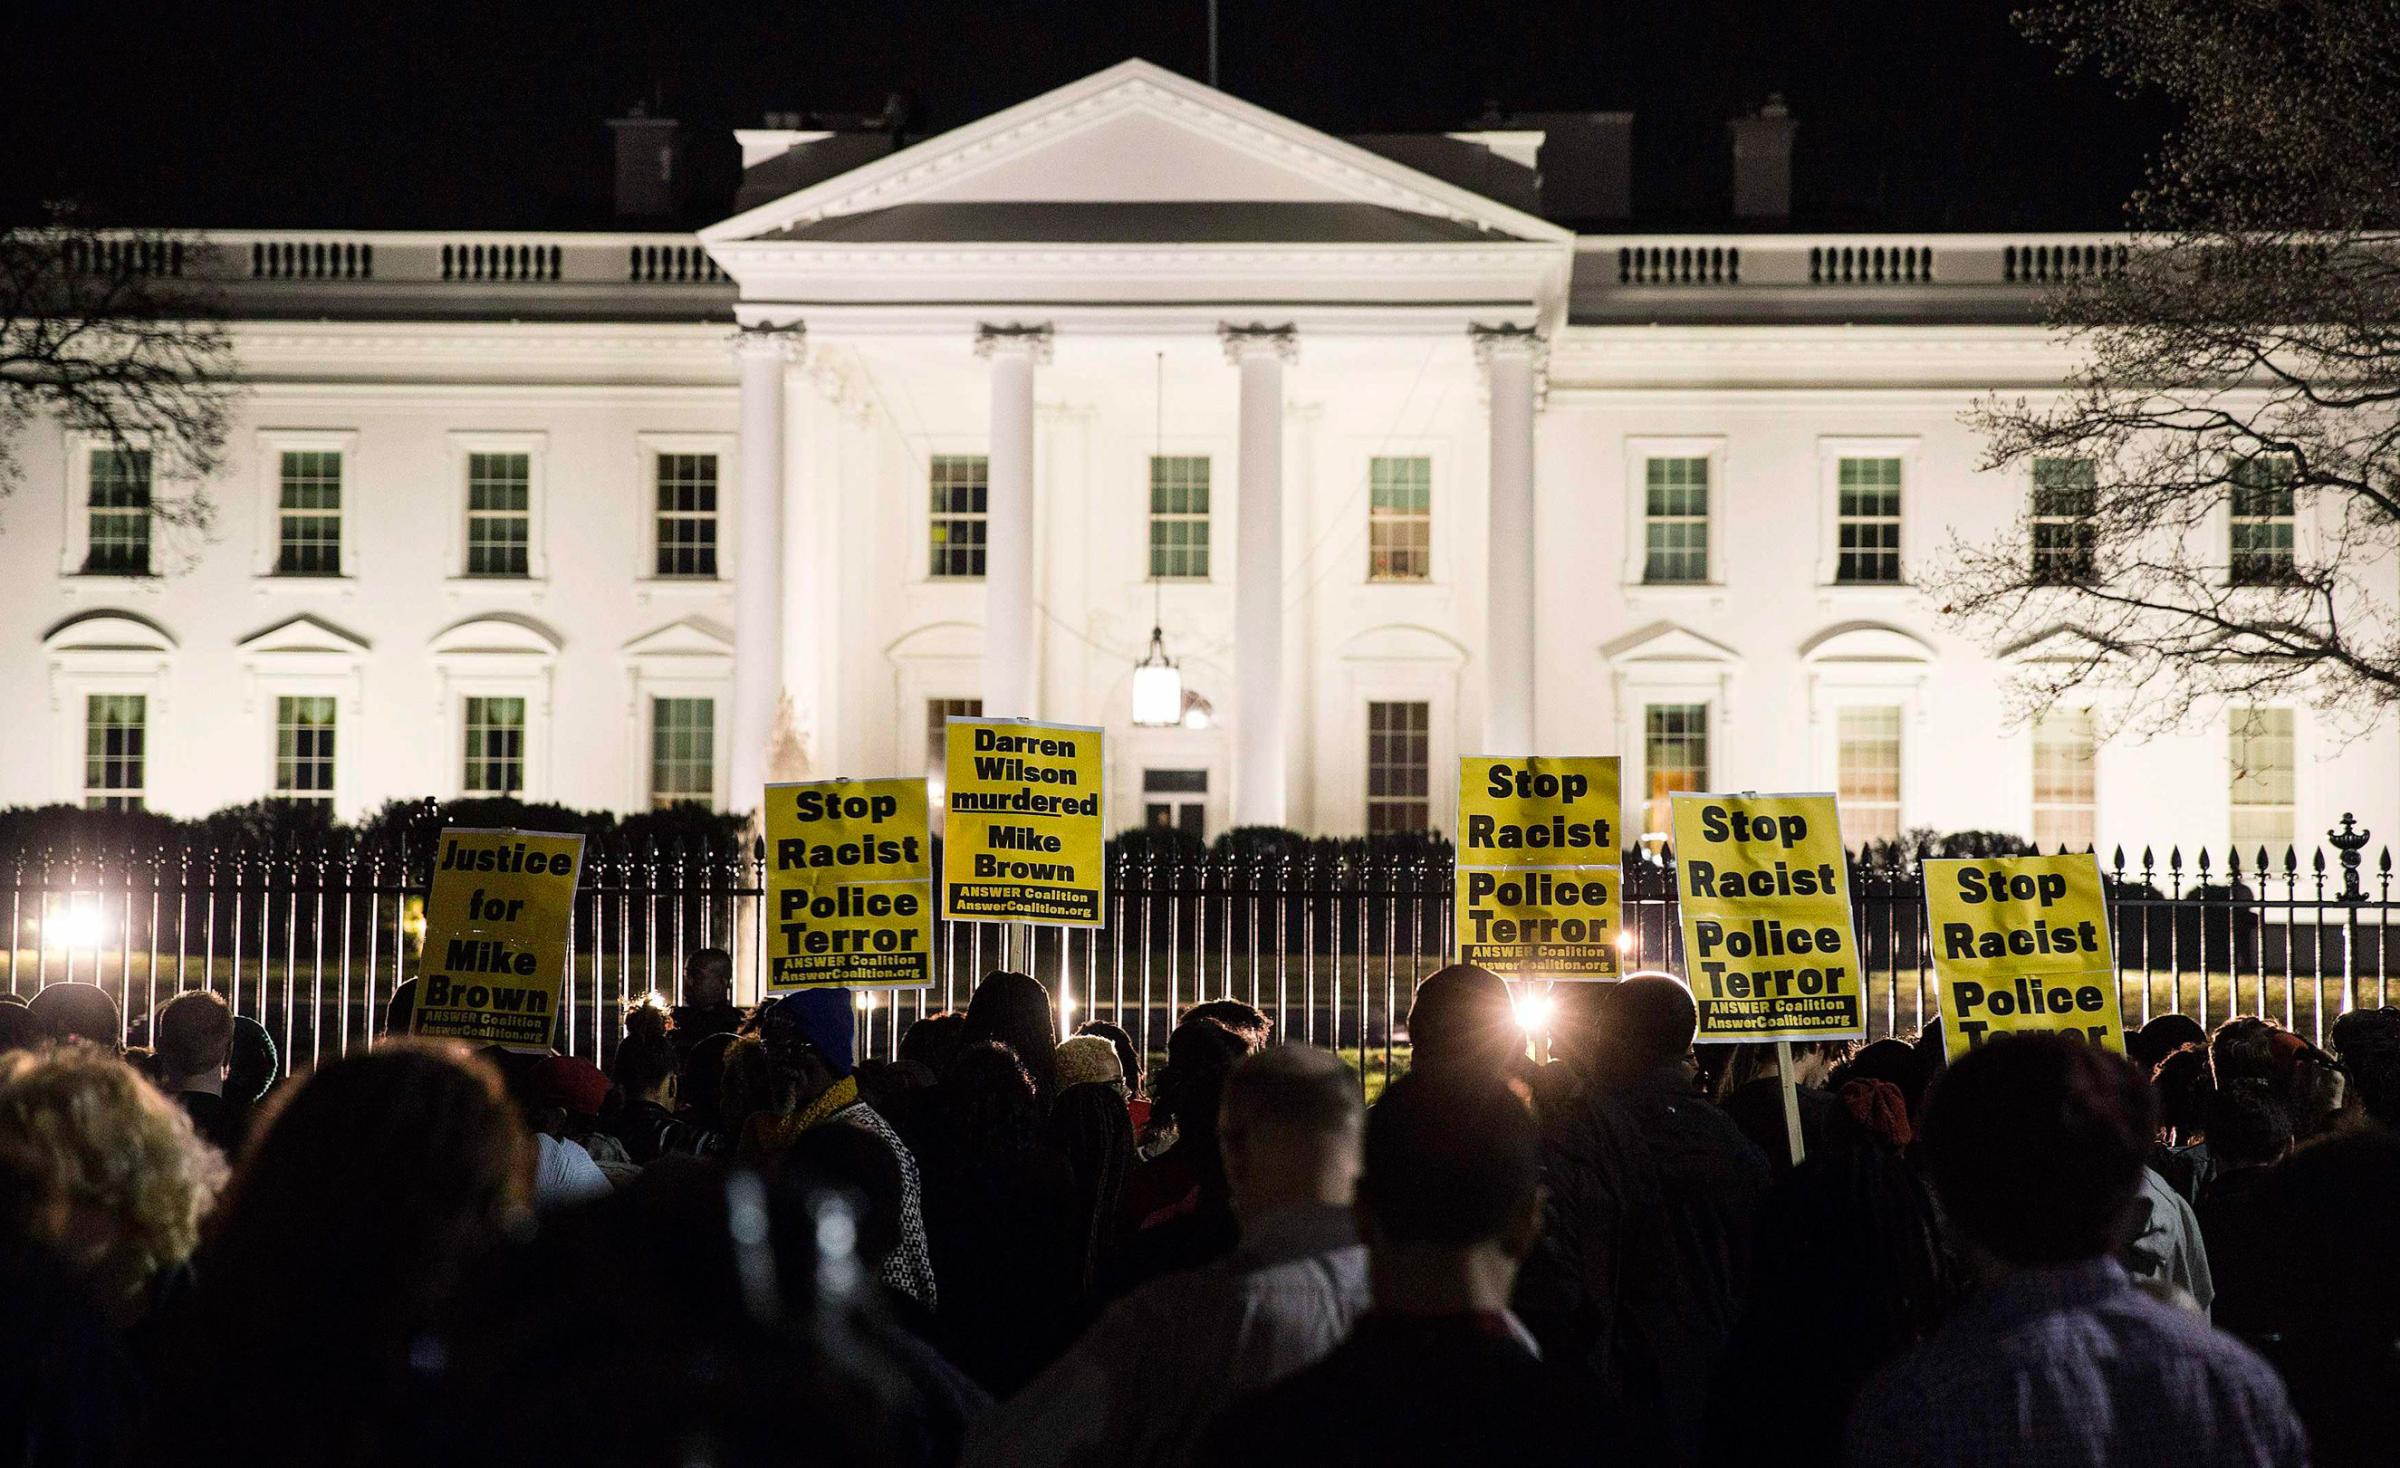 Protesters demonstrate in front of the White House in Washington, D.C., on Nov. 24, 2014.